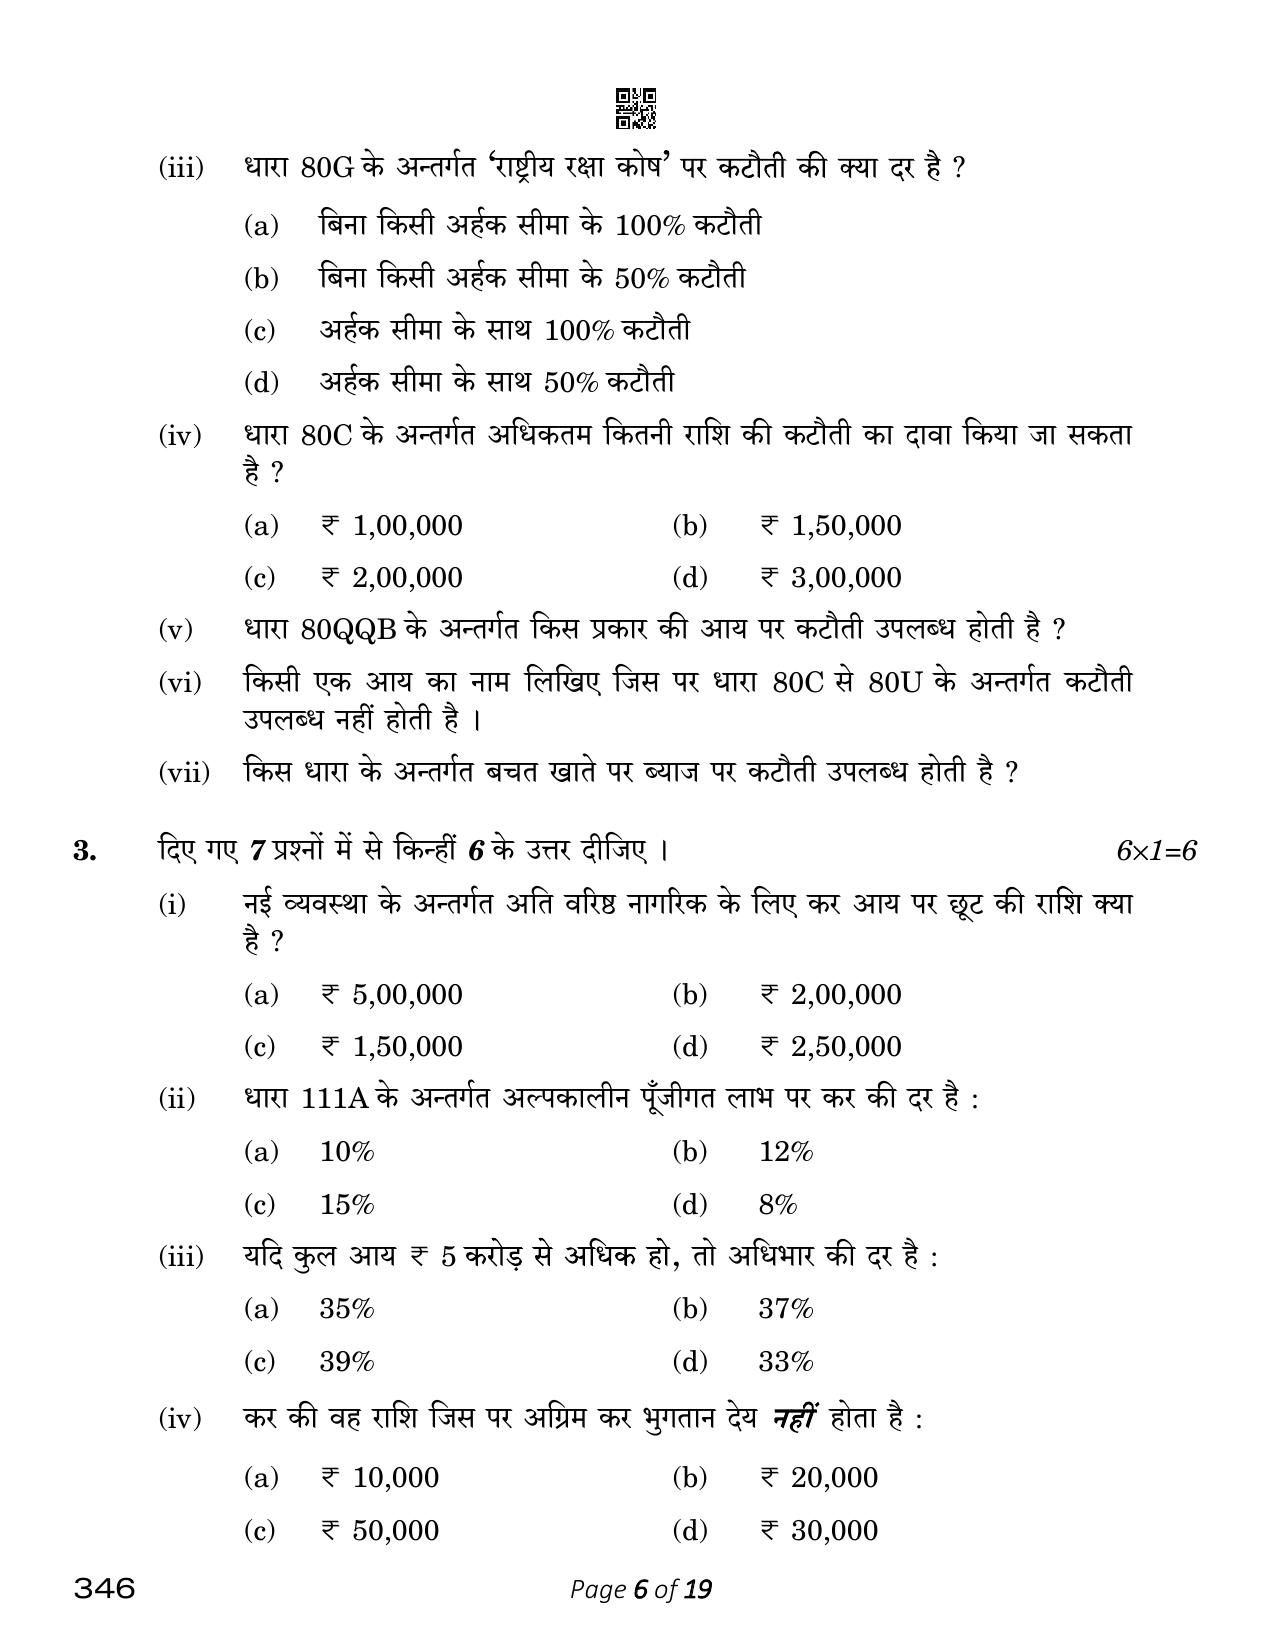 CBSE Class 12 Taxation (Compartment) 2023 Question Paper - Page 6